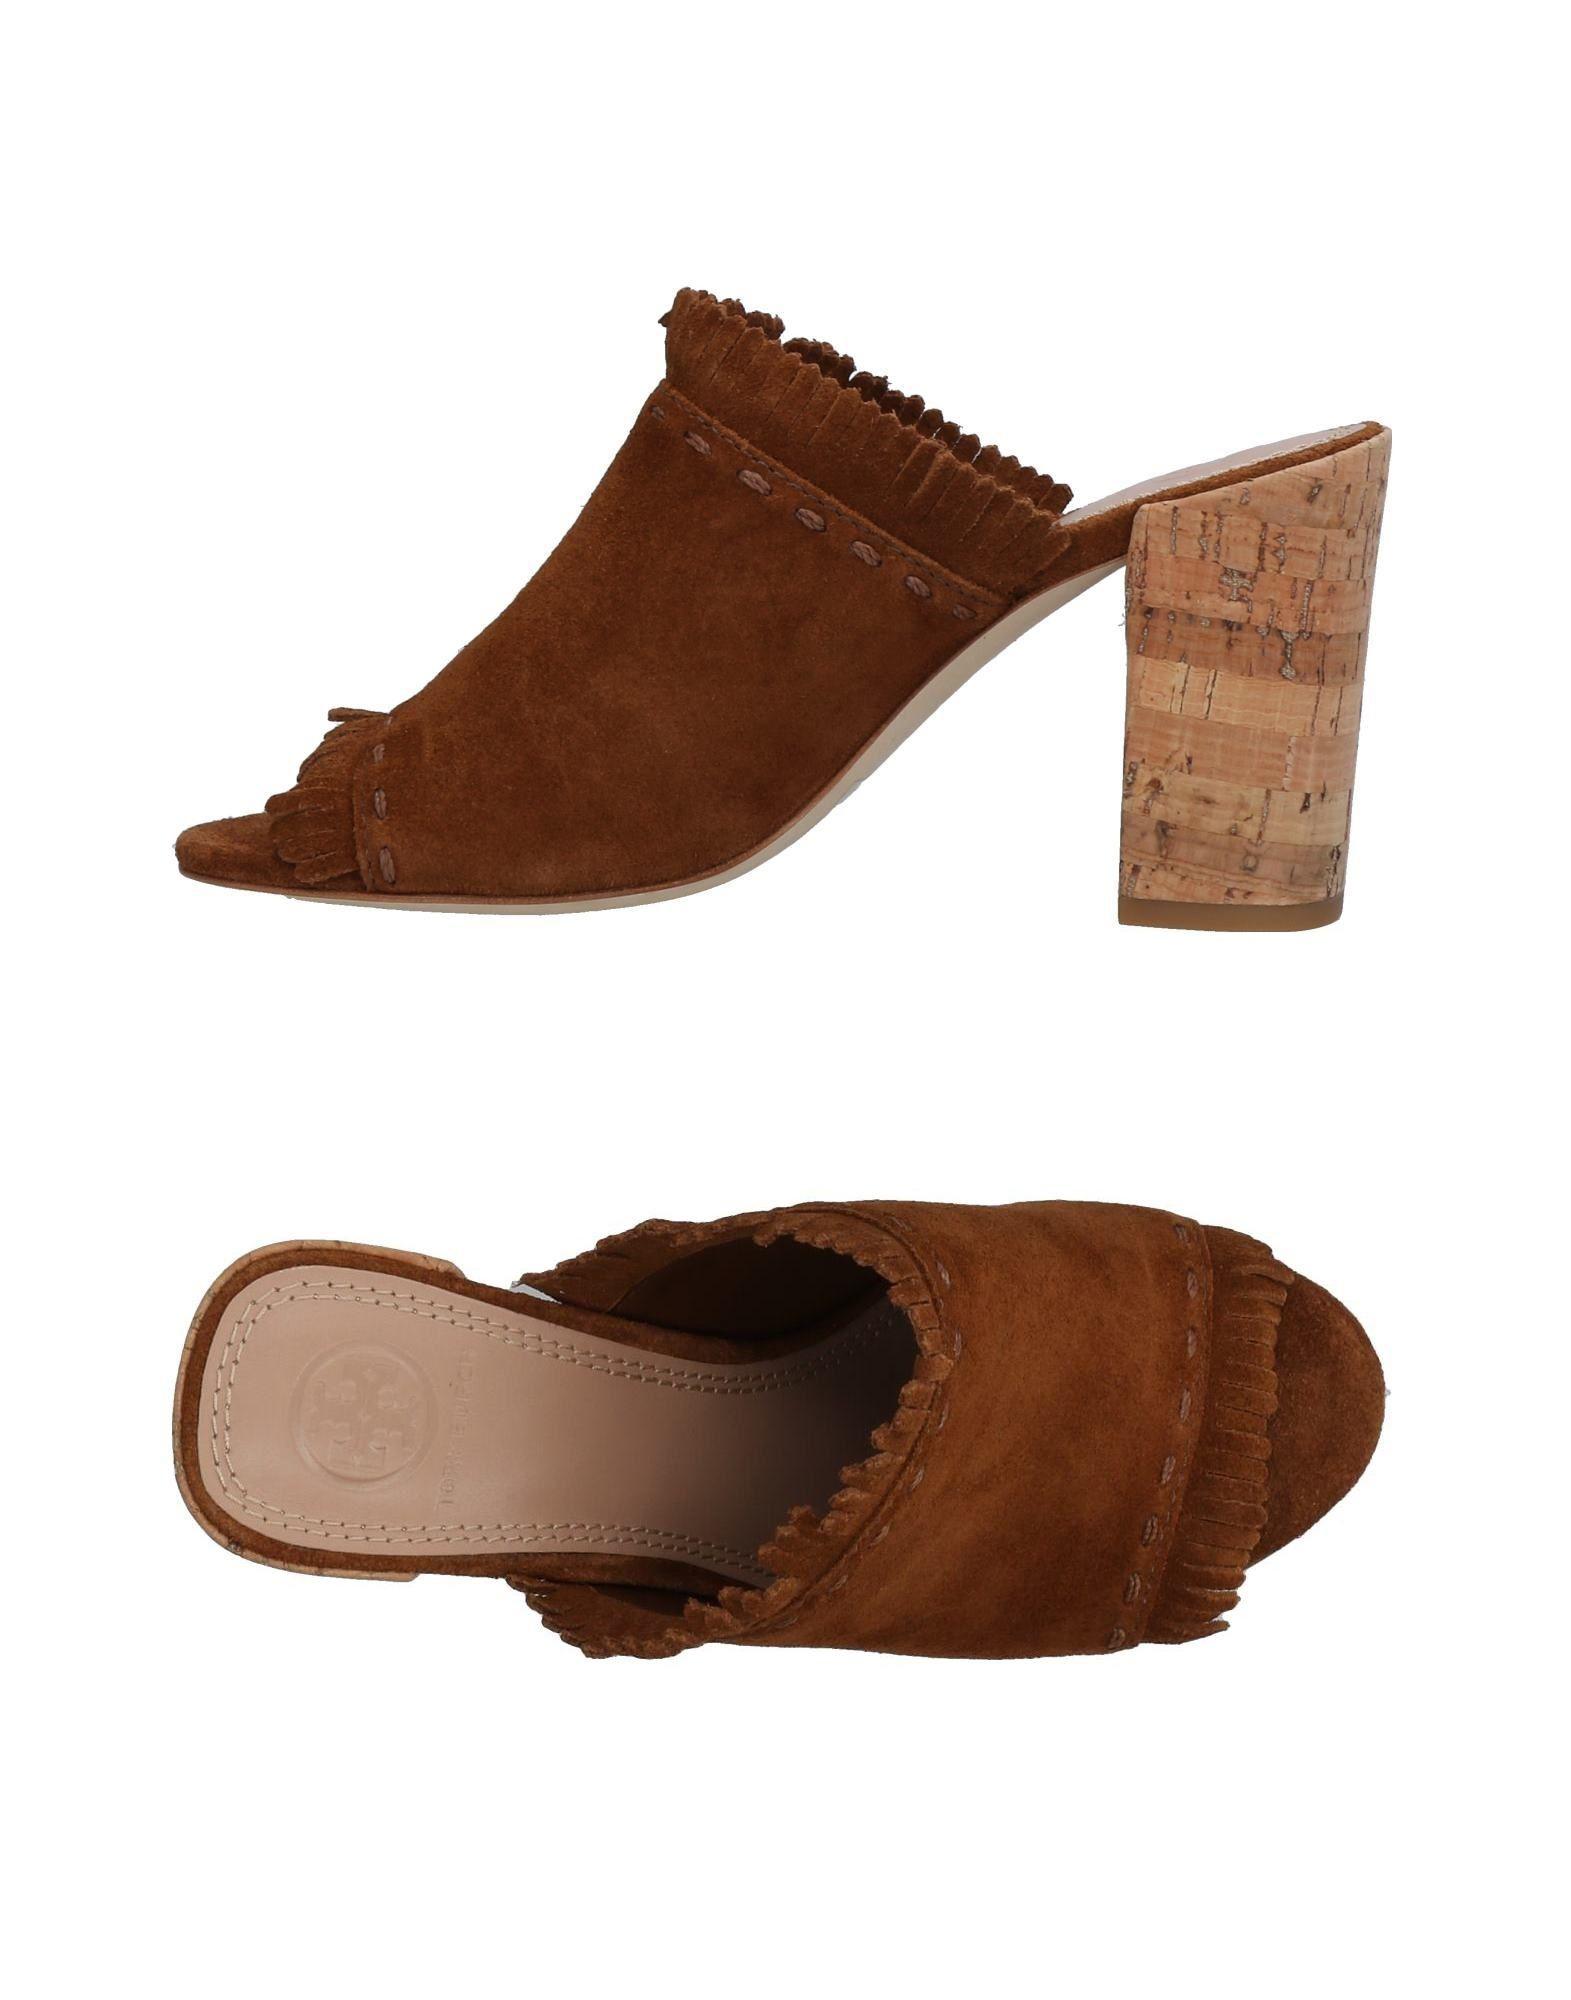 Tory Burch Suede Sandals in Brown - Save 39% - Lyst